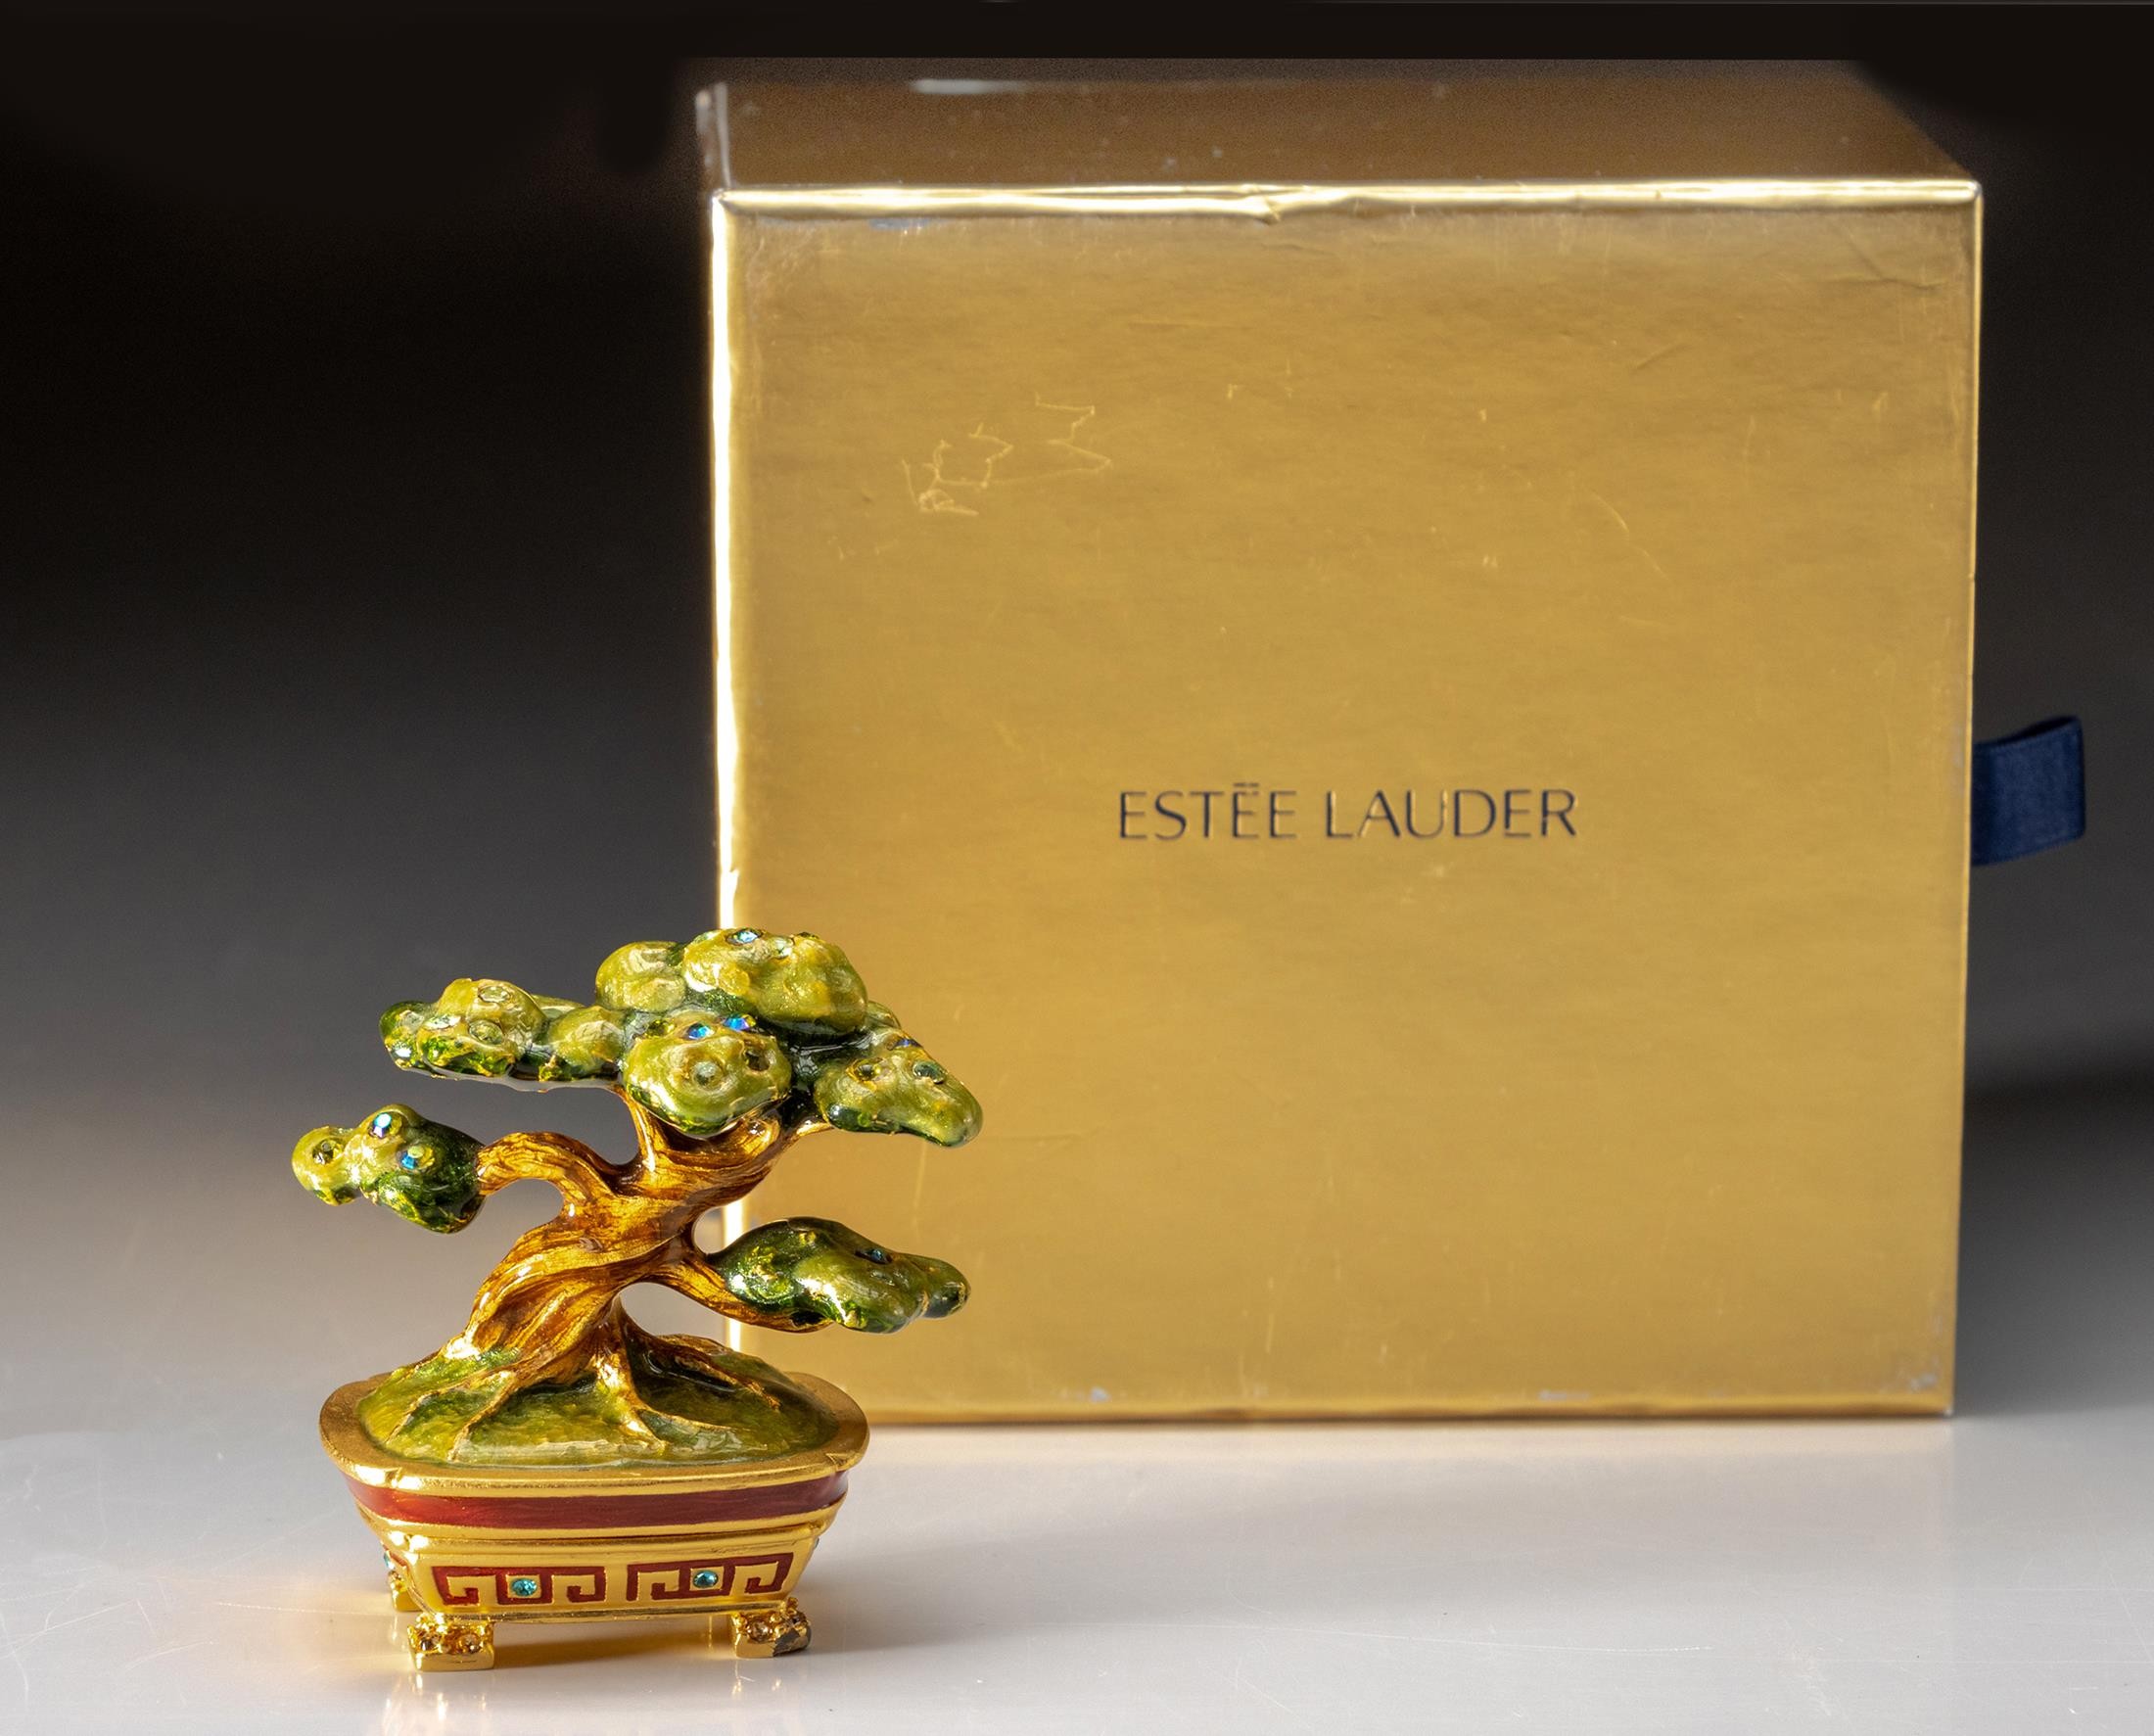 AN ESTEE LAUDER SOLID PERFUME COMPACT, MAGNIFICENT BONSAI - DESIGNED BY JAY STRONGWATER, 2007 - Image 2 of 2